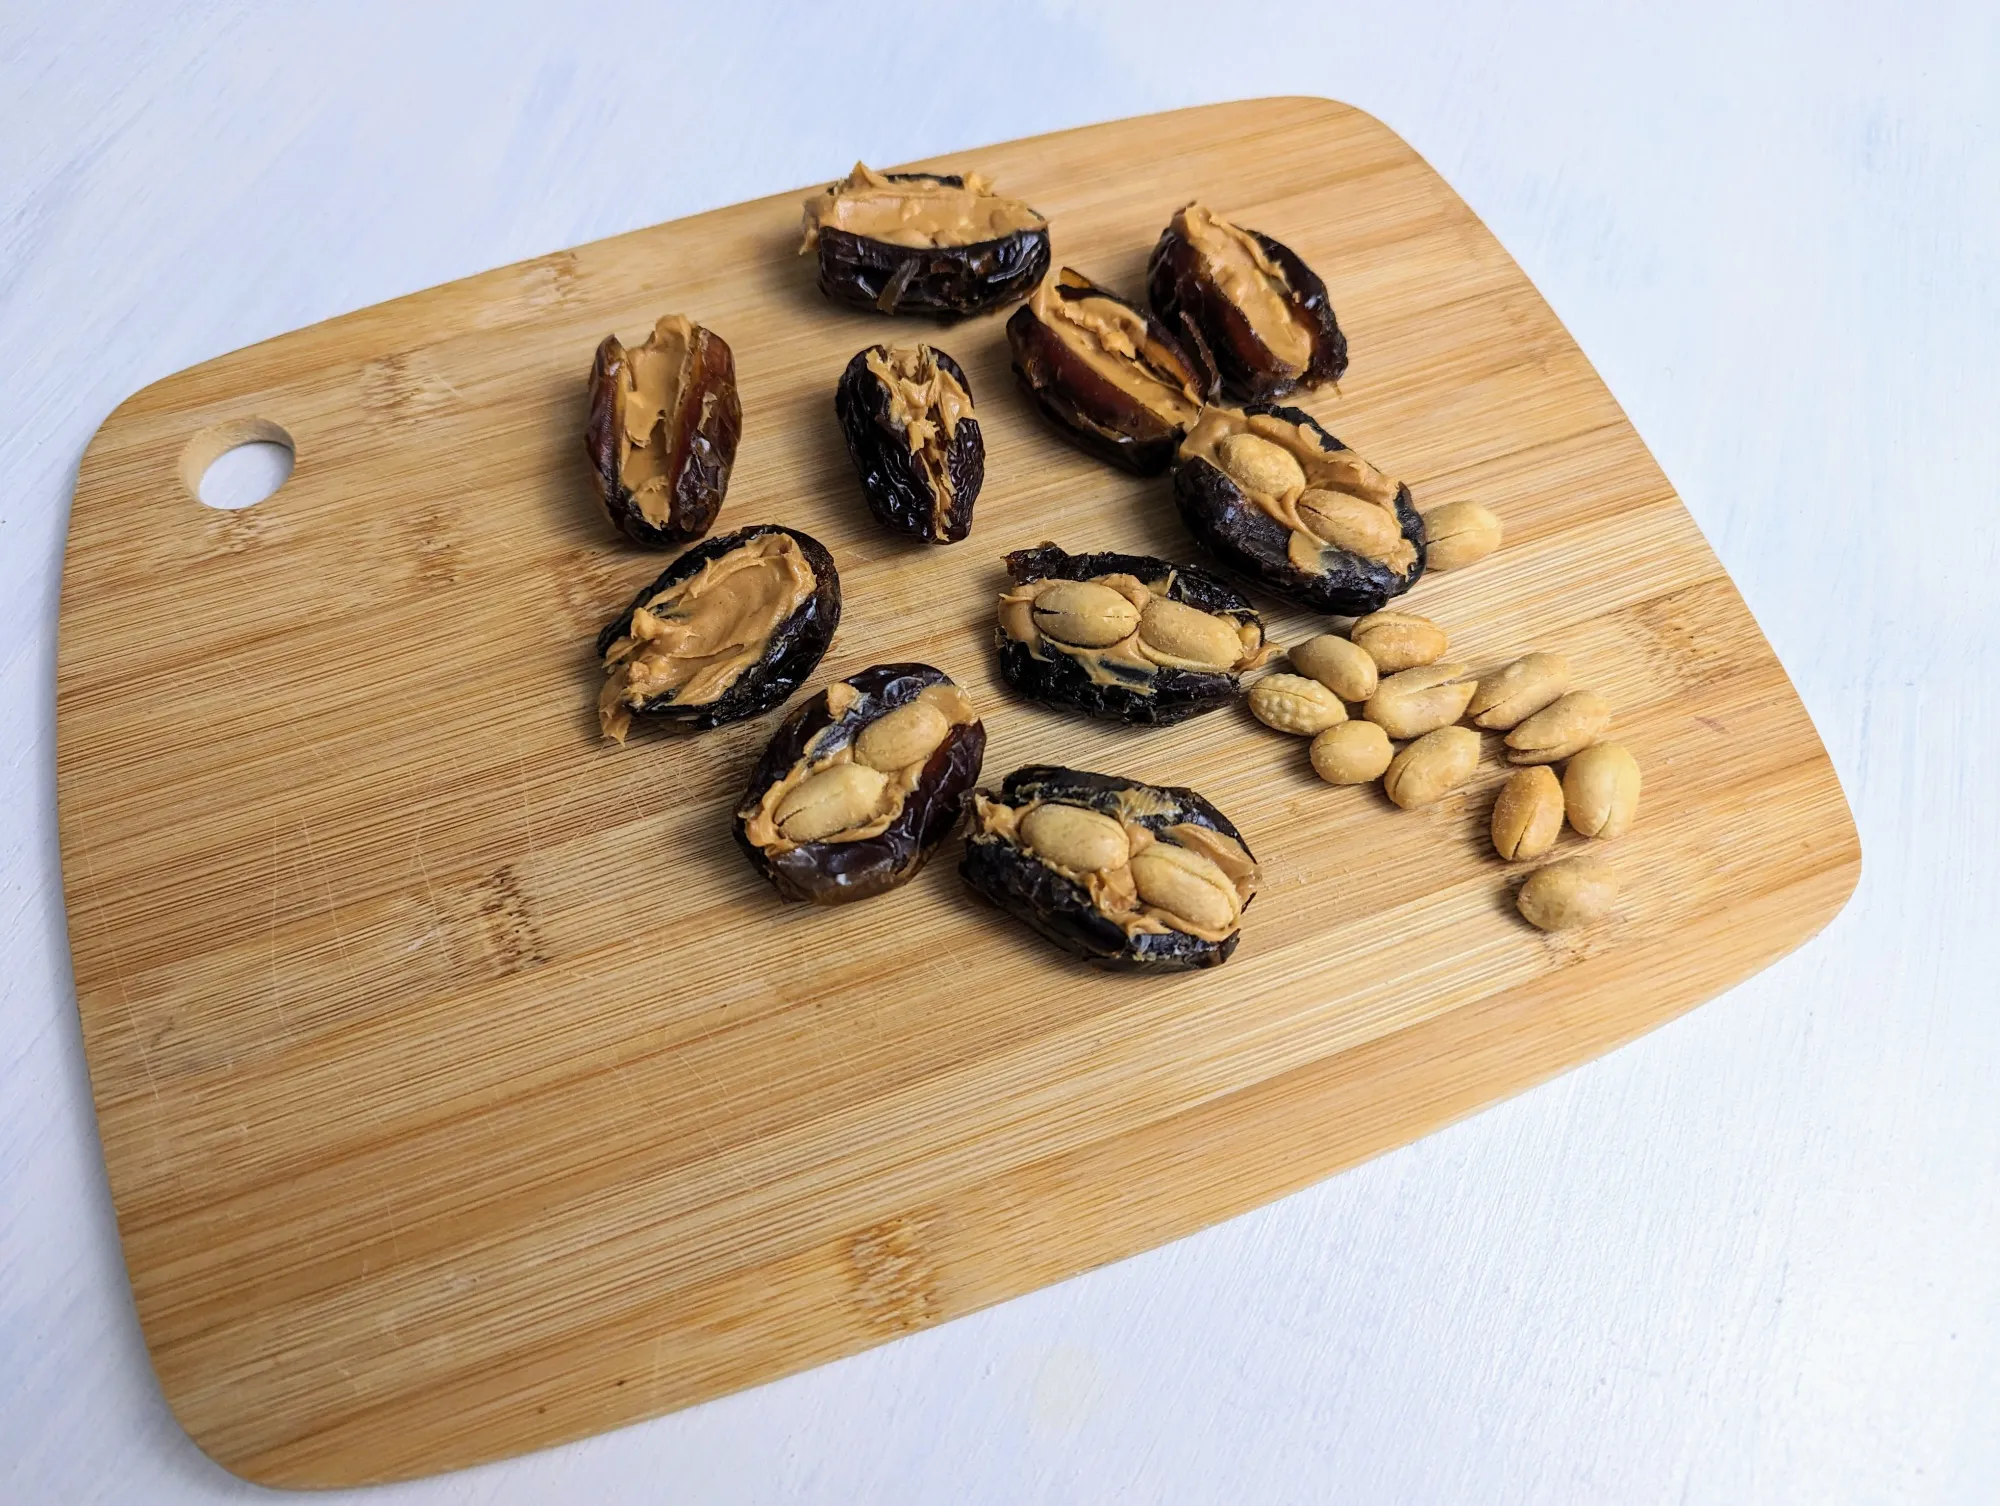 Pitted dates filled with peanut butter and peanuts on a cutting board